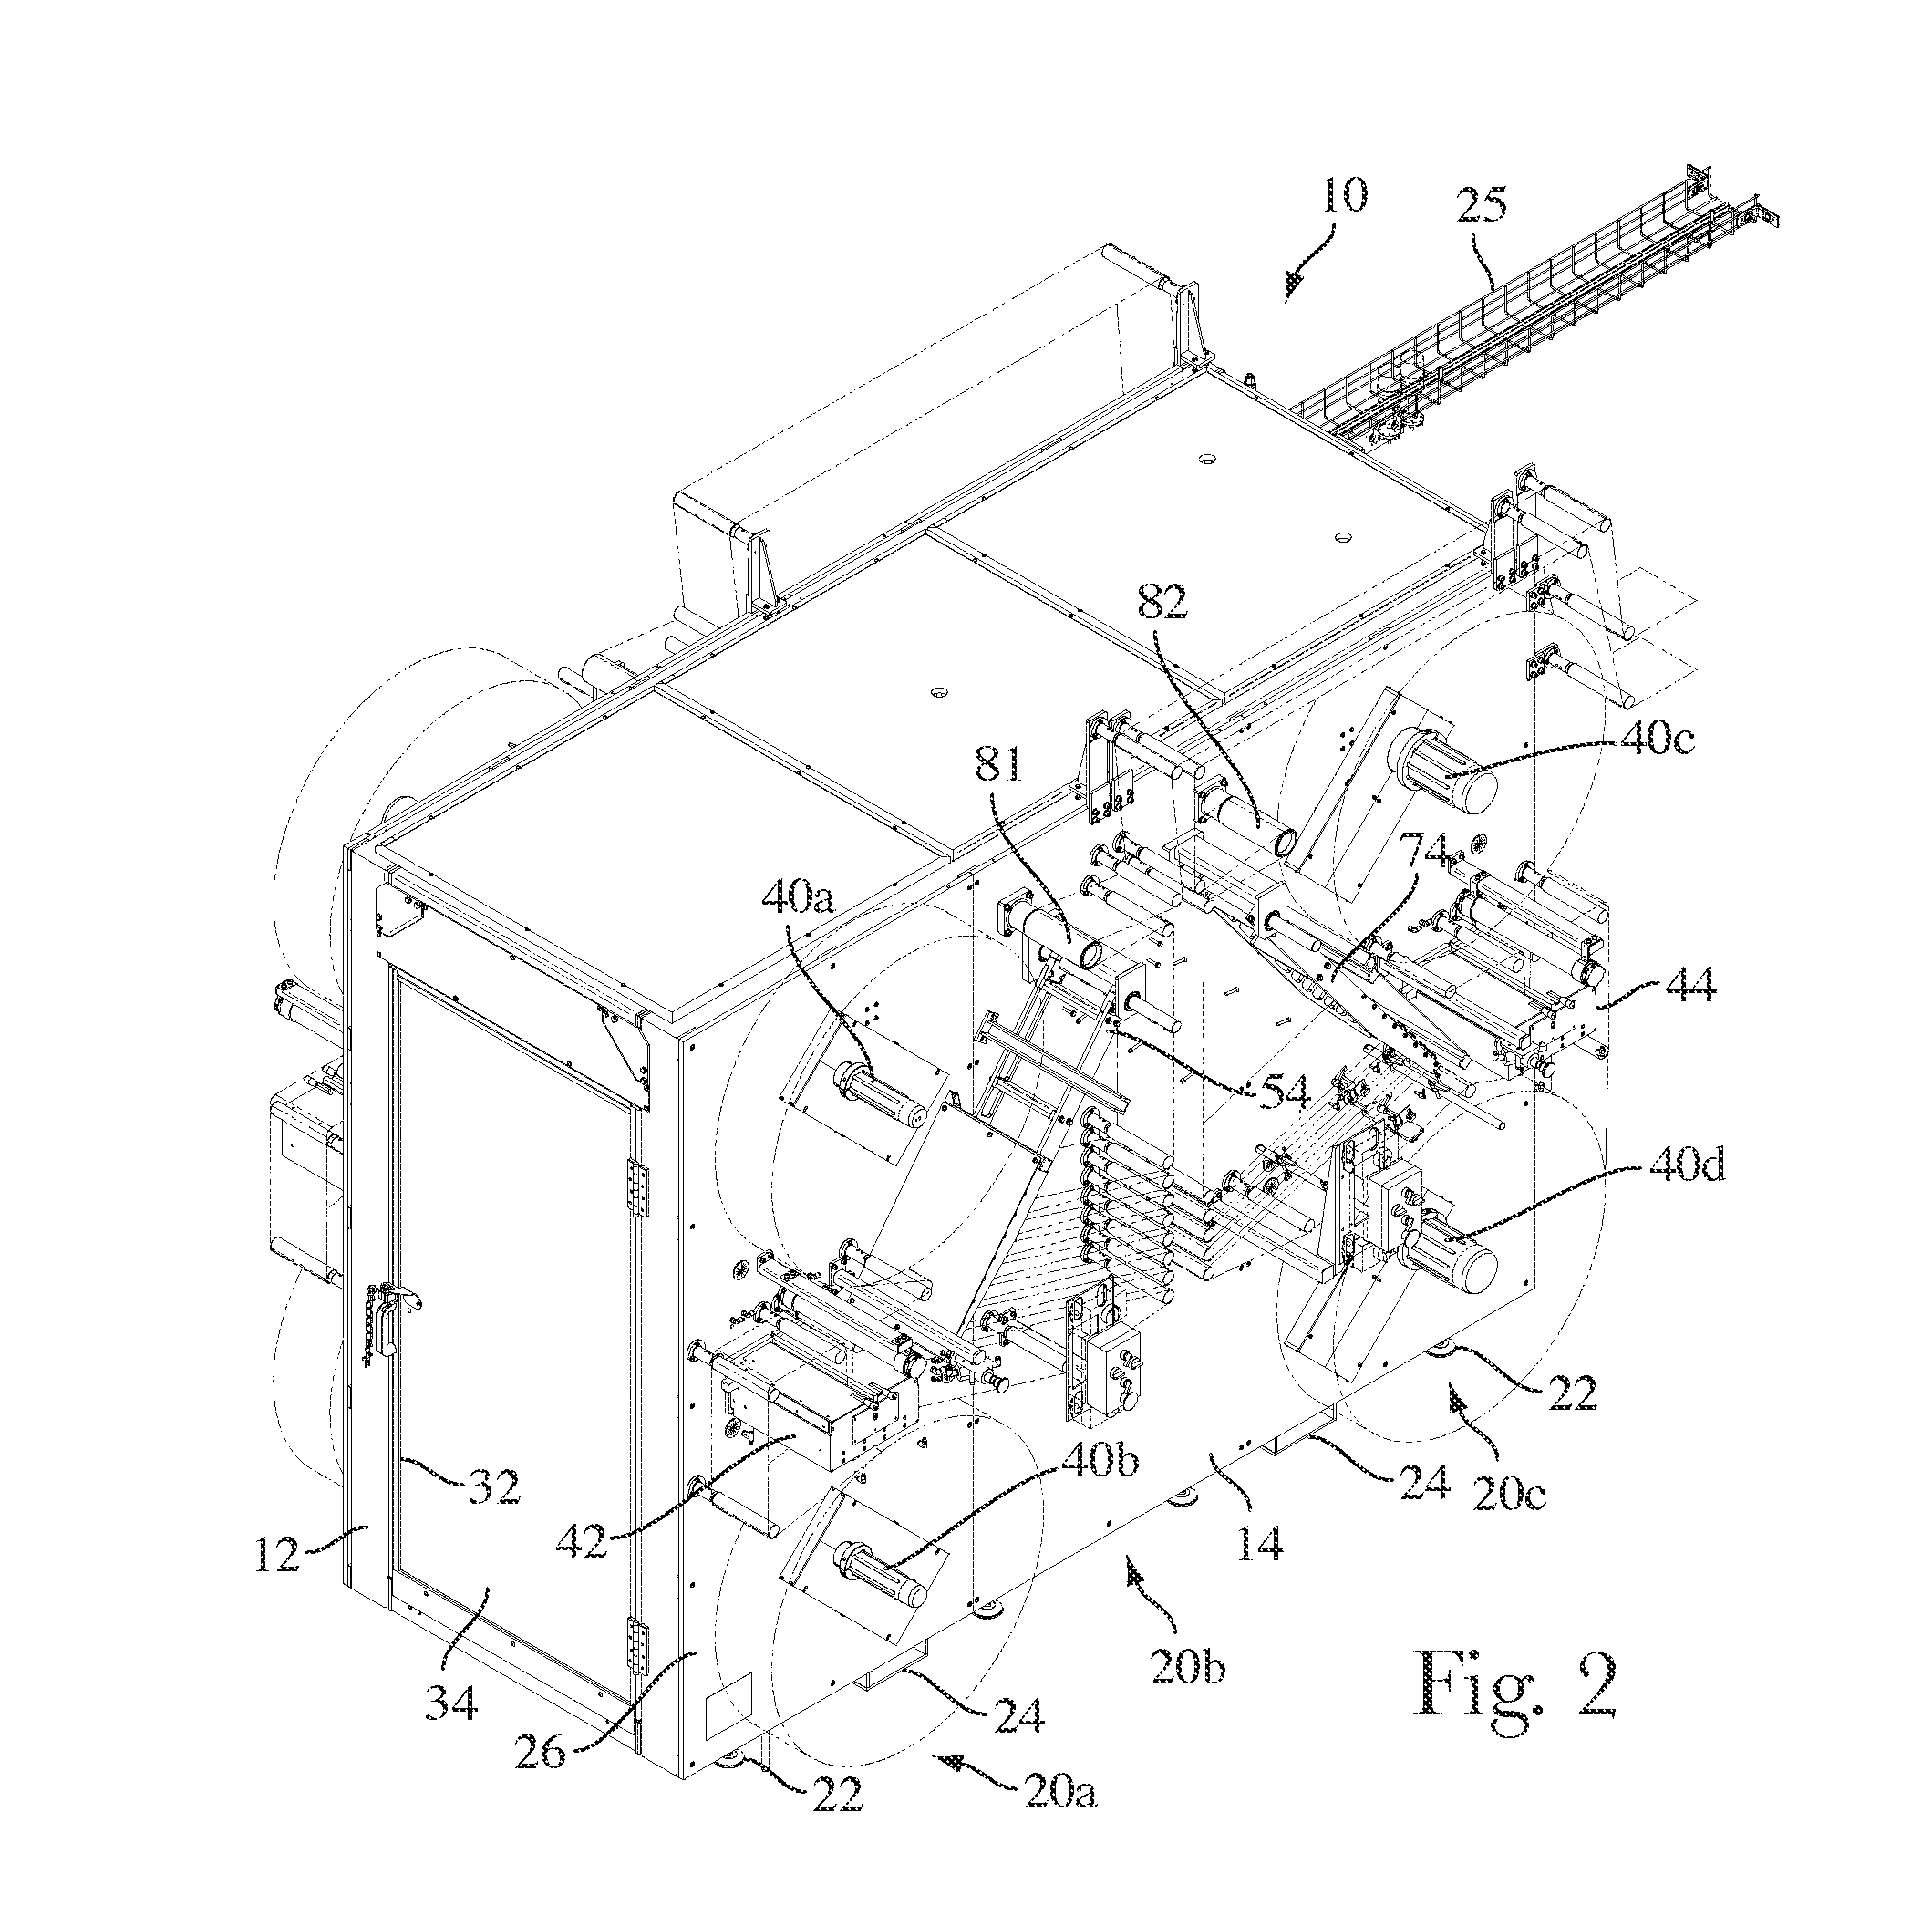 Systems and Methods for Continuous Delivery of Web Materials